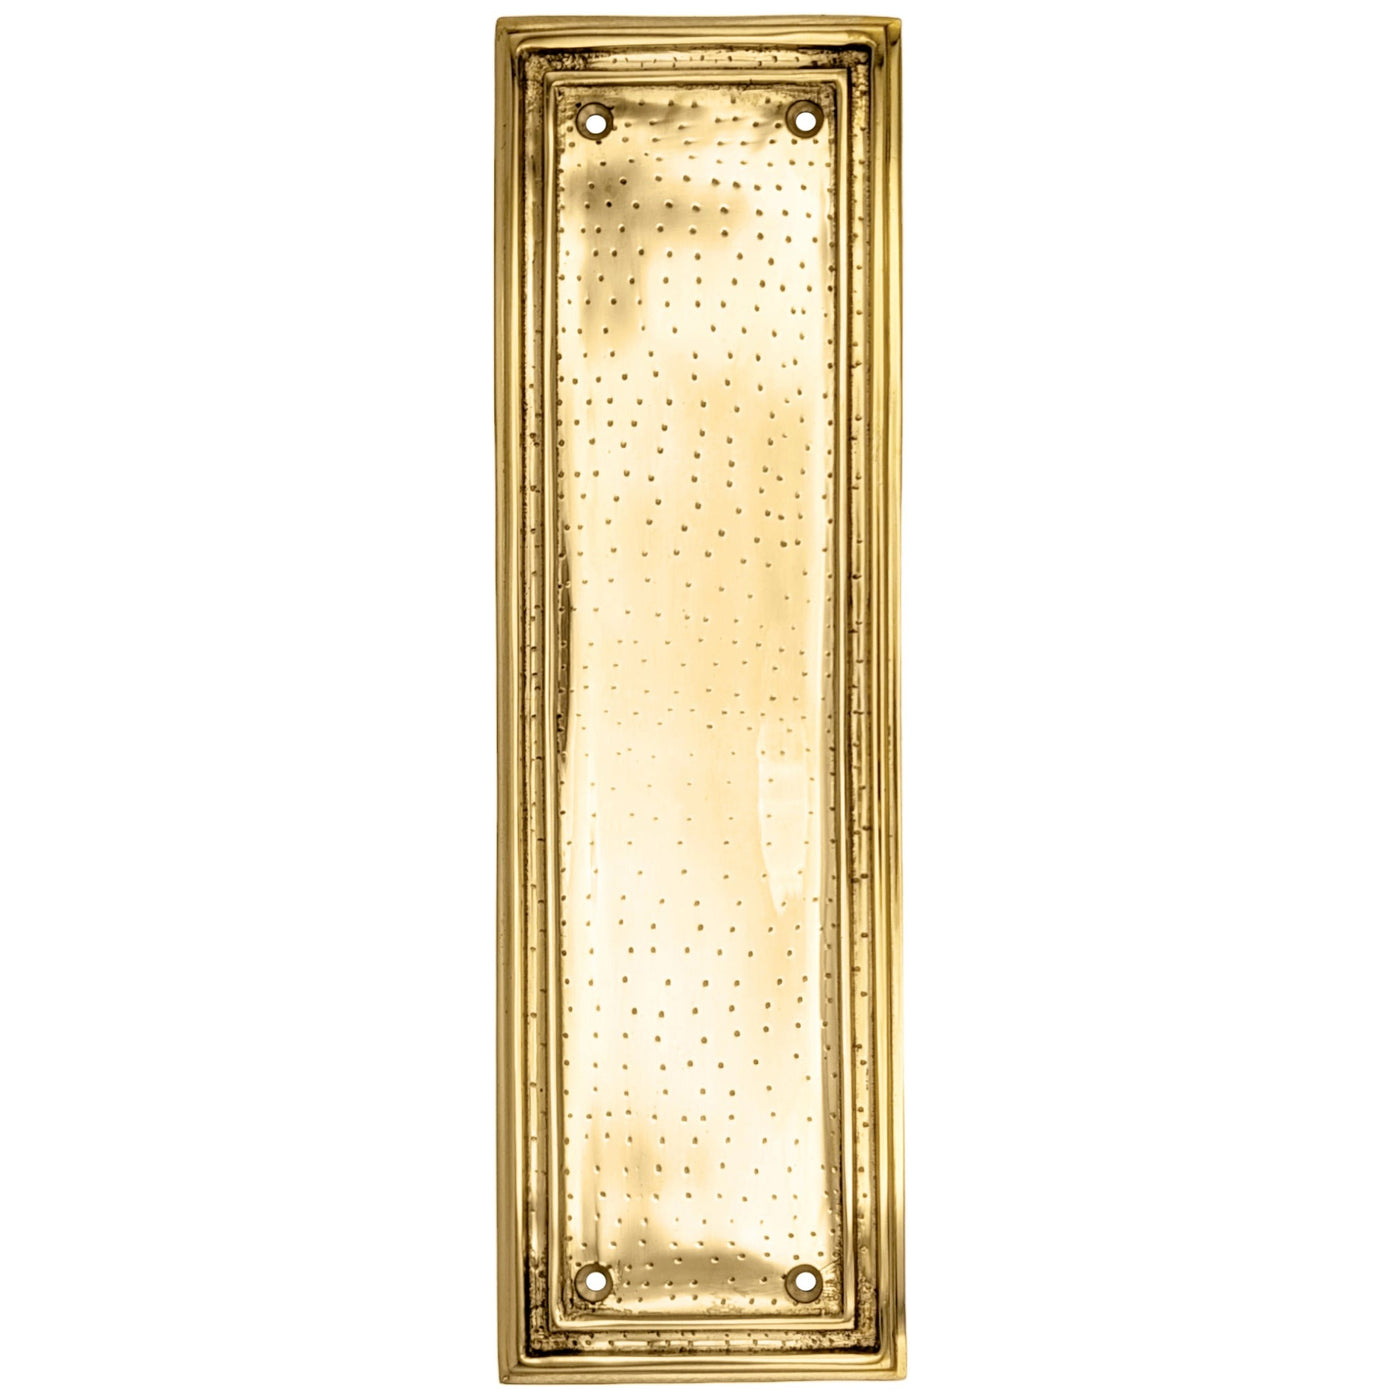 10 inch Solid Brass Classic Style Push Plate (Several Finishes Available)